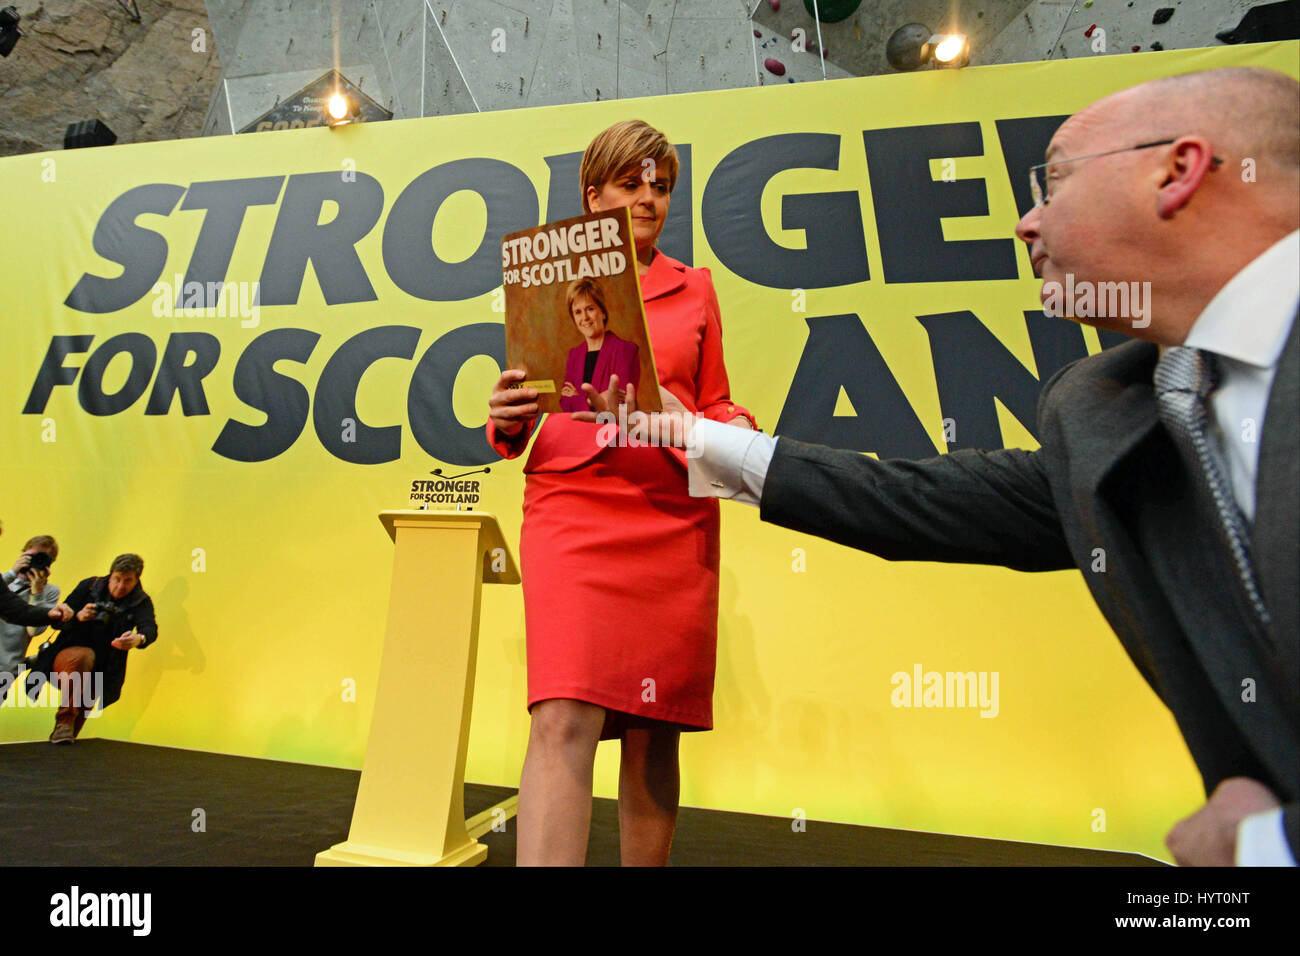 SNP leader and Scottish First Minister Nicola Sturgeon is handed a copy of the party's general election manifesto by her husband, SNP Chief Executive Peter Murrell at a launch event in Edinburgh Stock Photo